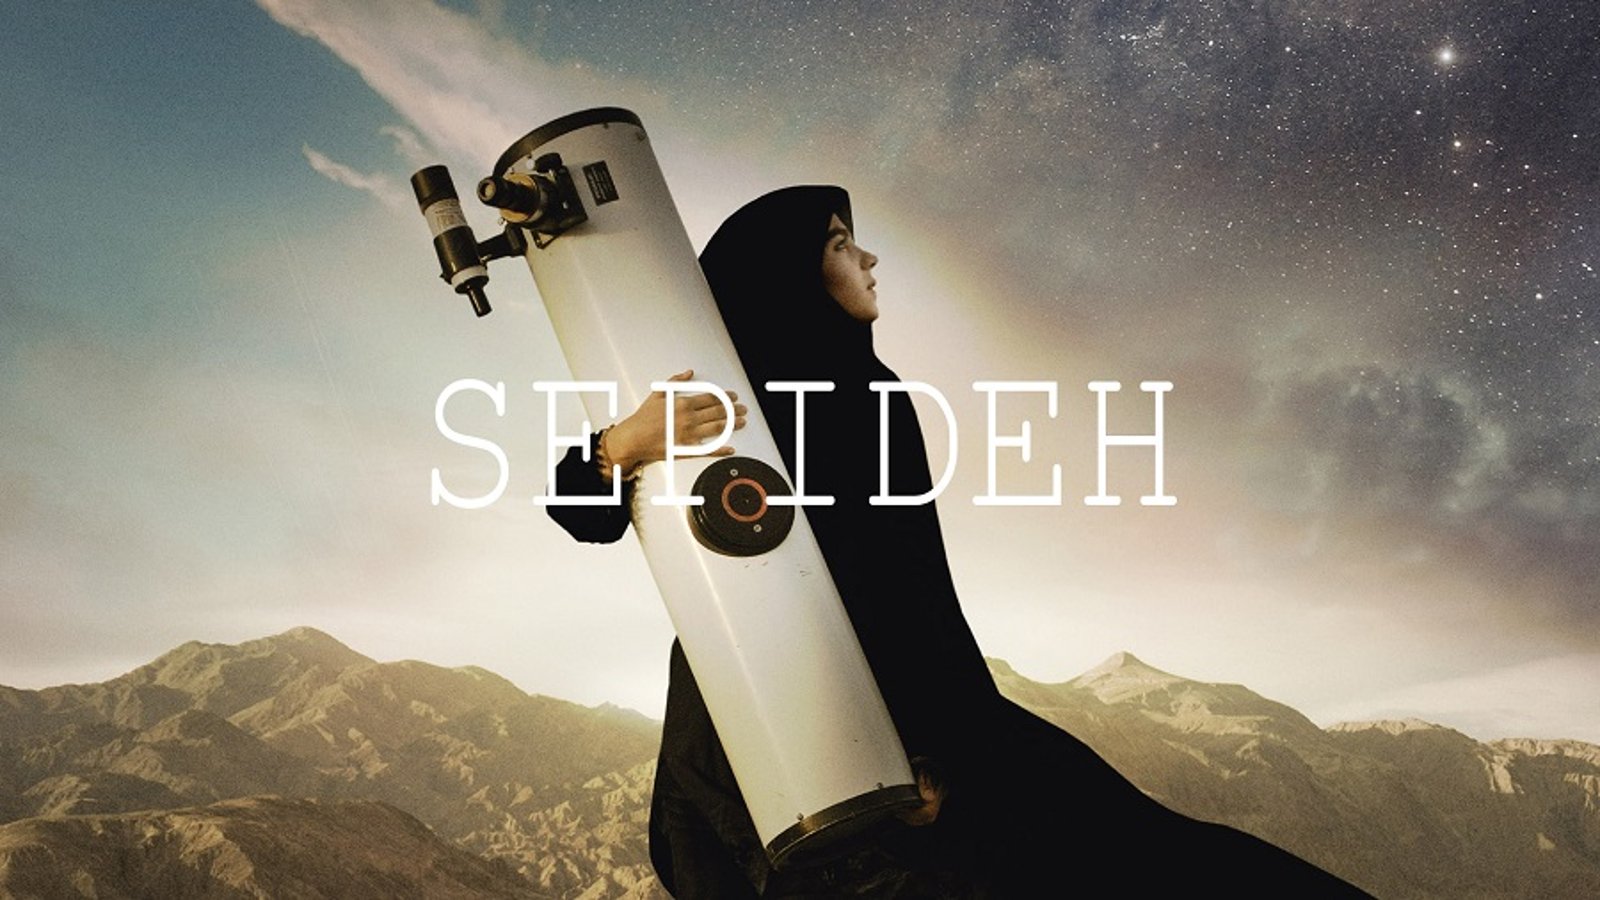 Sepideh - An Iranian Teenager's Dream to Become an Astronaut